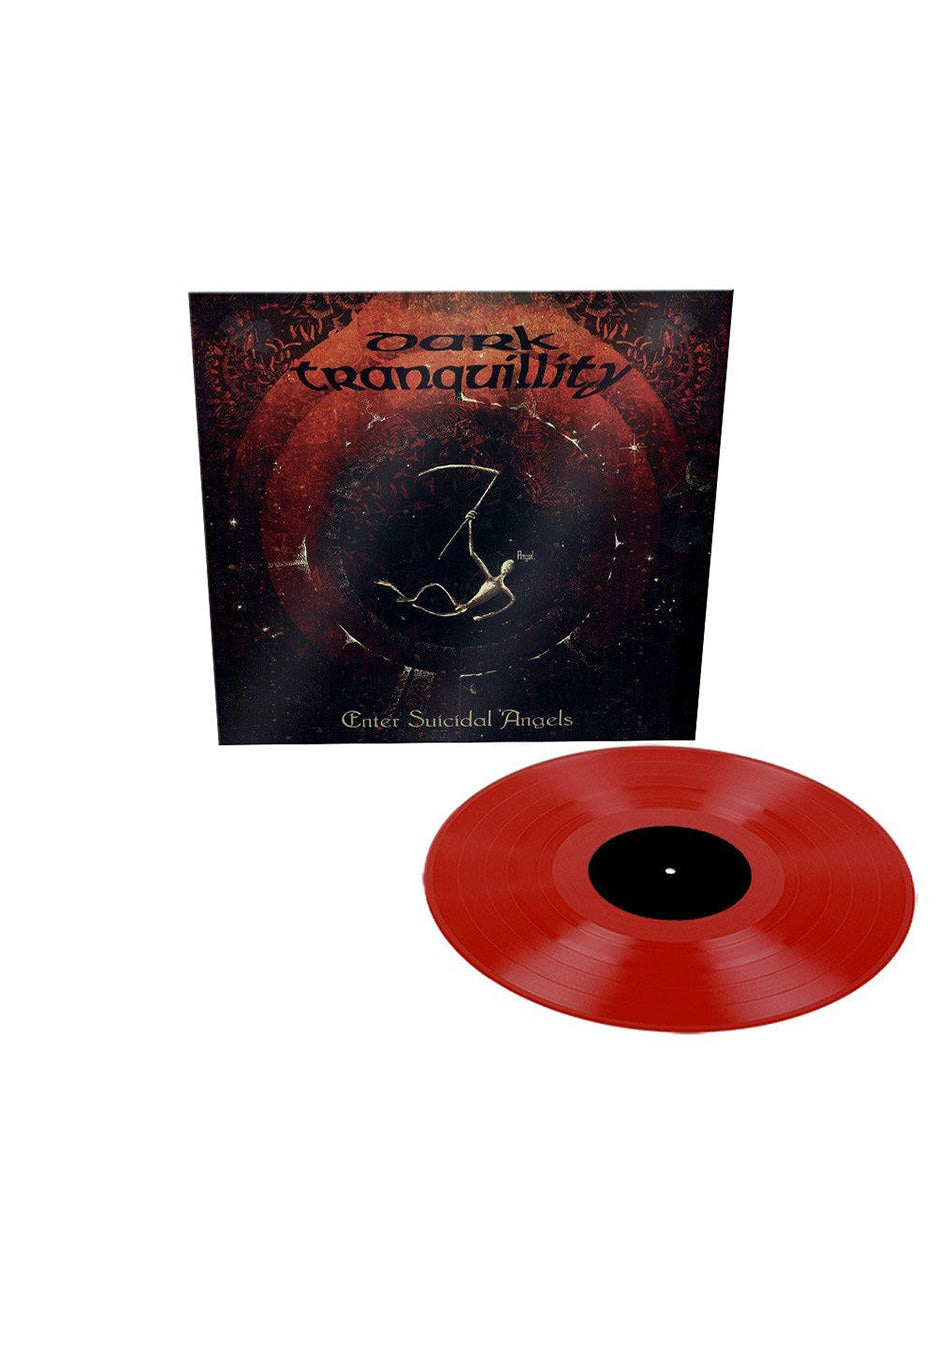 Dark Tranquillity - Enter Suicidal Angels (Re-Issue 2021) Brick Red - Colored Vinyl